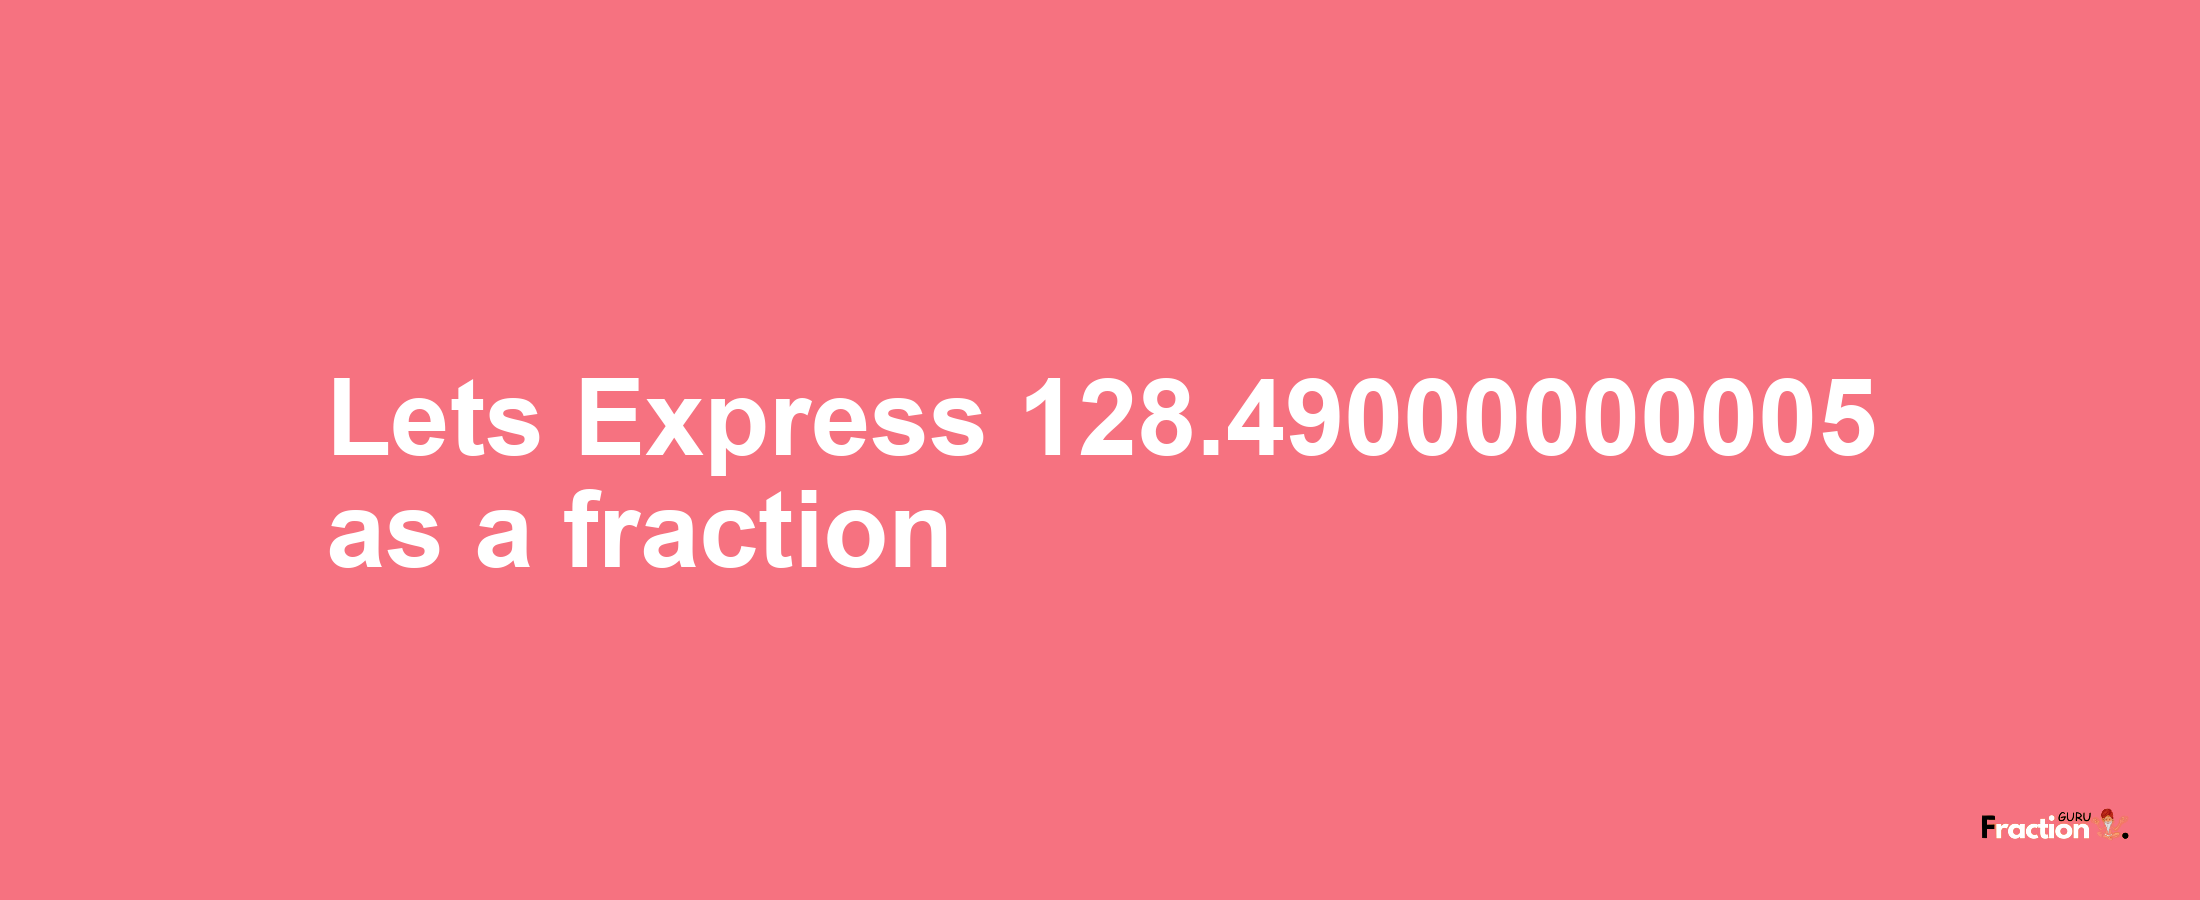 Lets Express 128.49000000005 as afraction